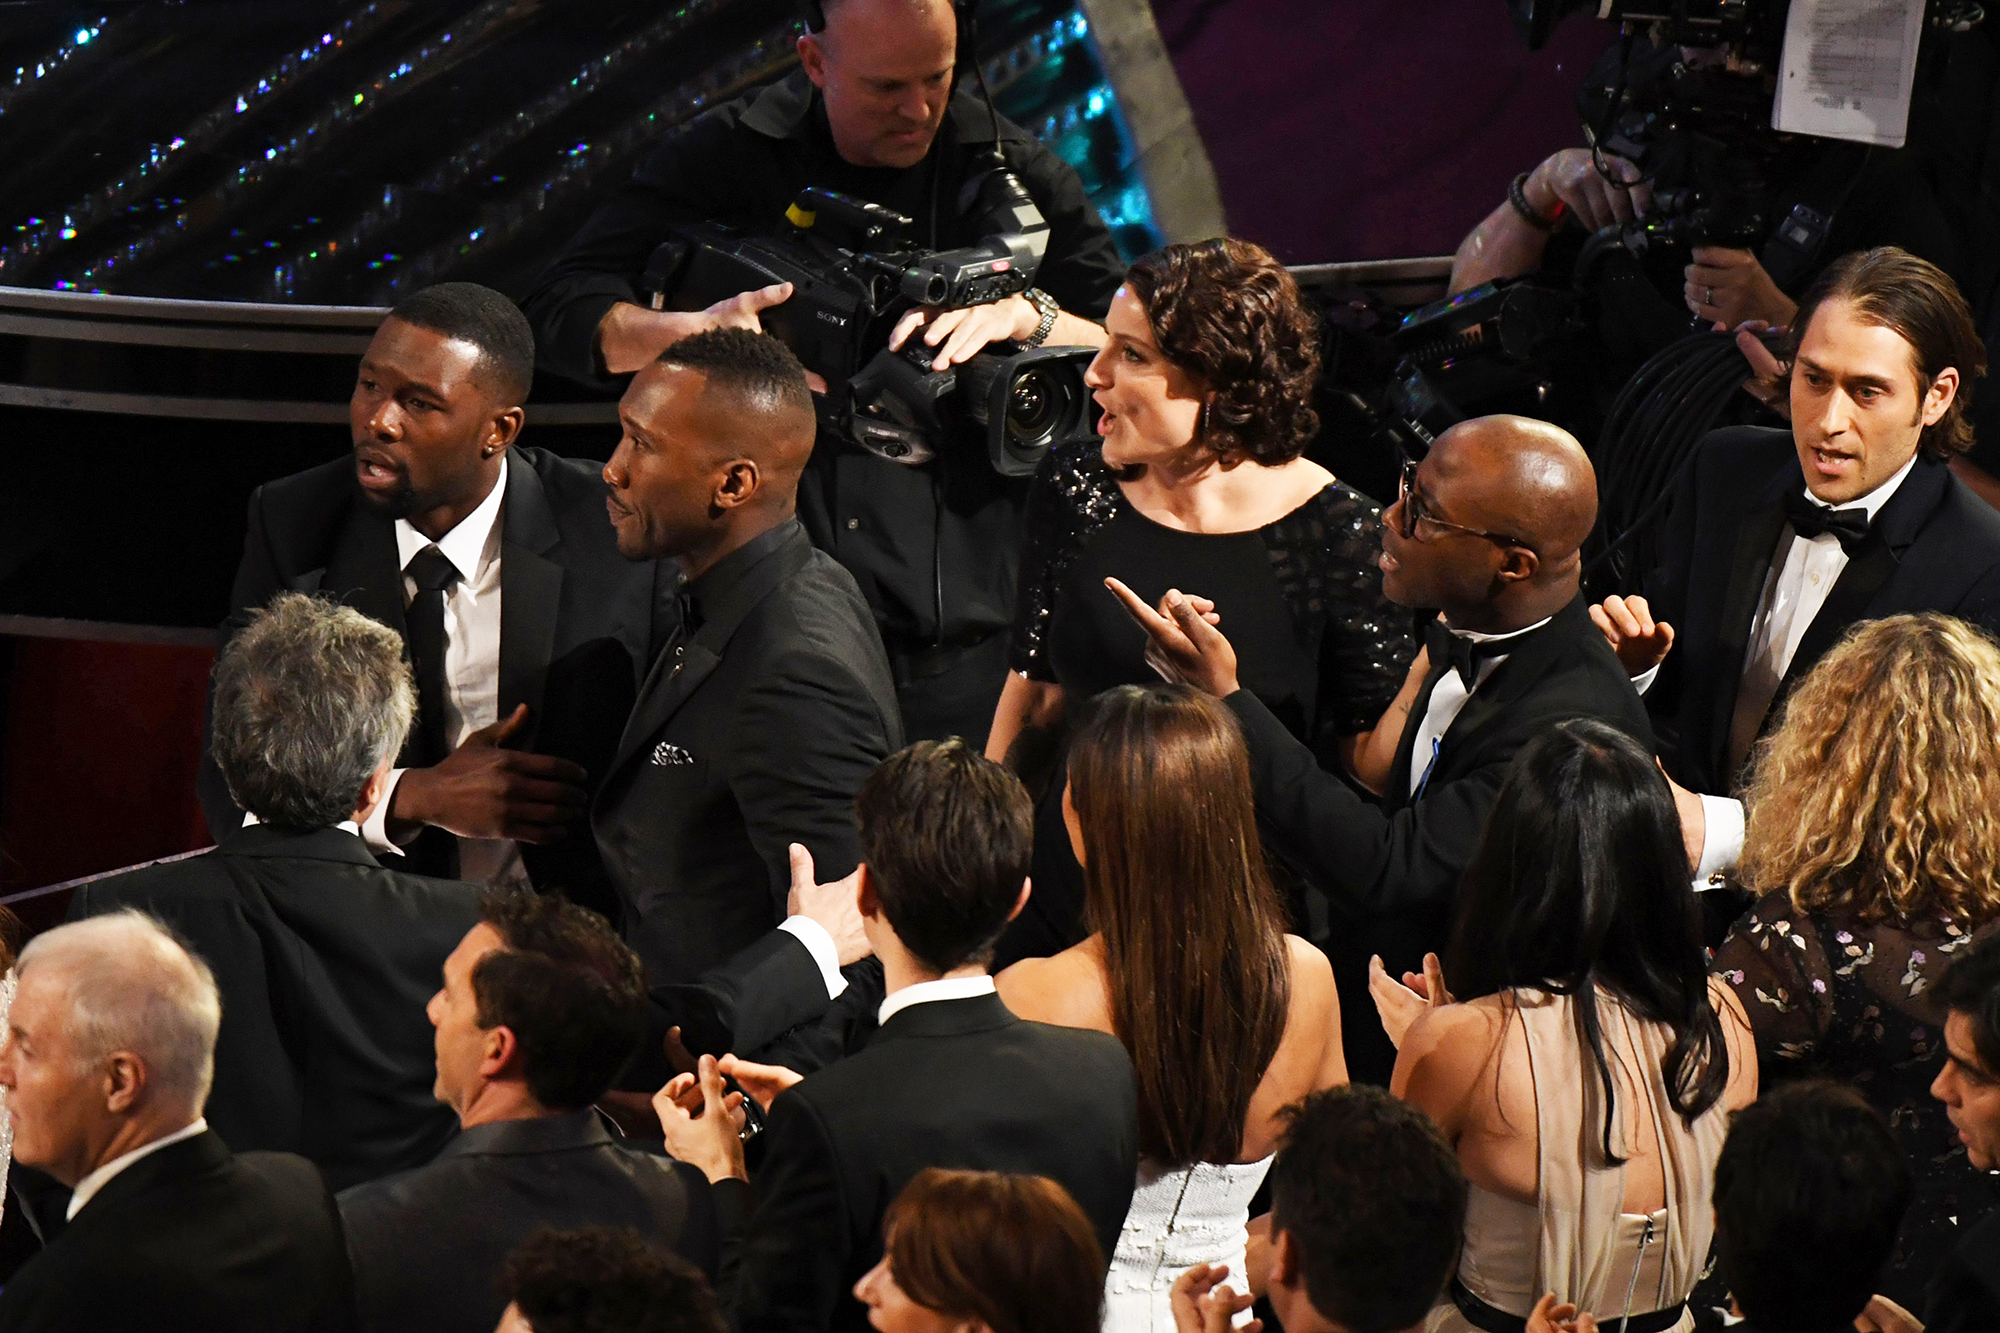 The cast and crew of Moonlight react after they won the Best Picture Oscar, on Feb. 26, 2017 in Hollywood, Calif.